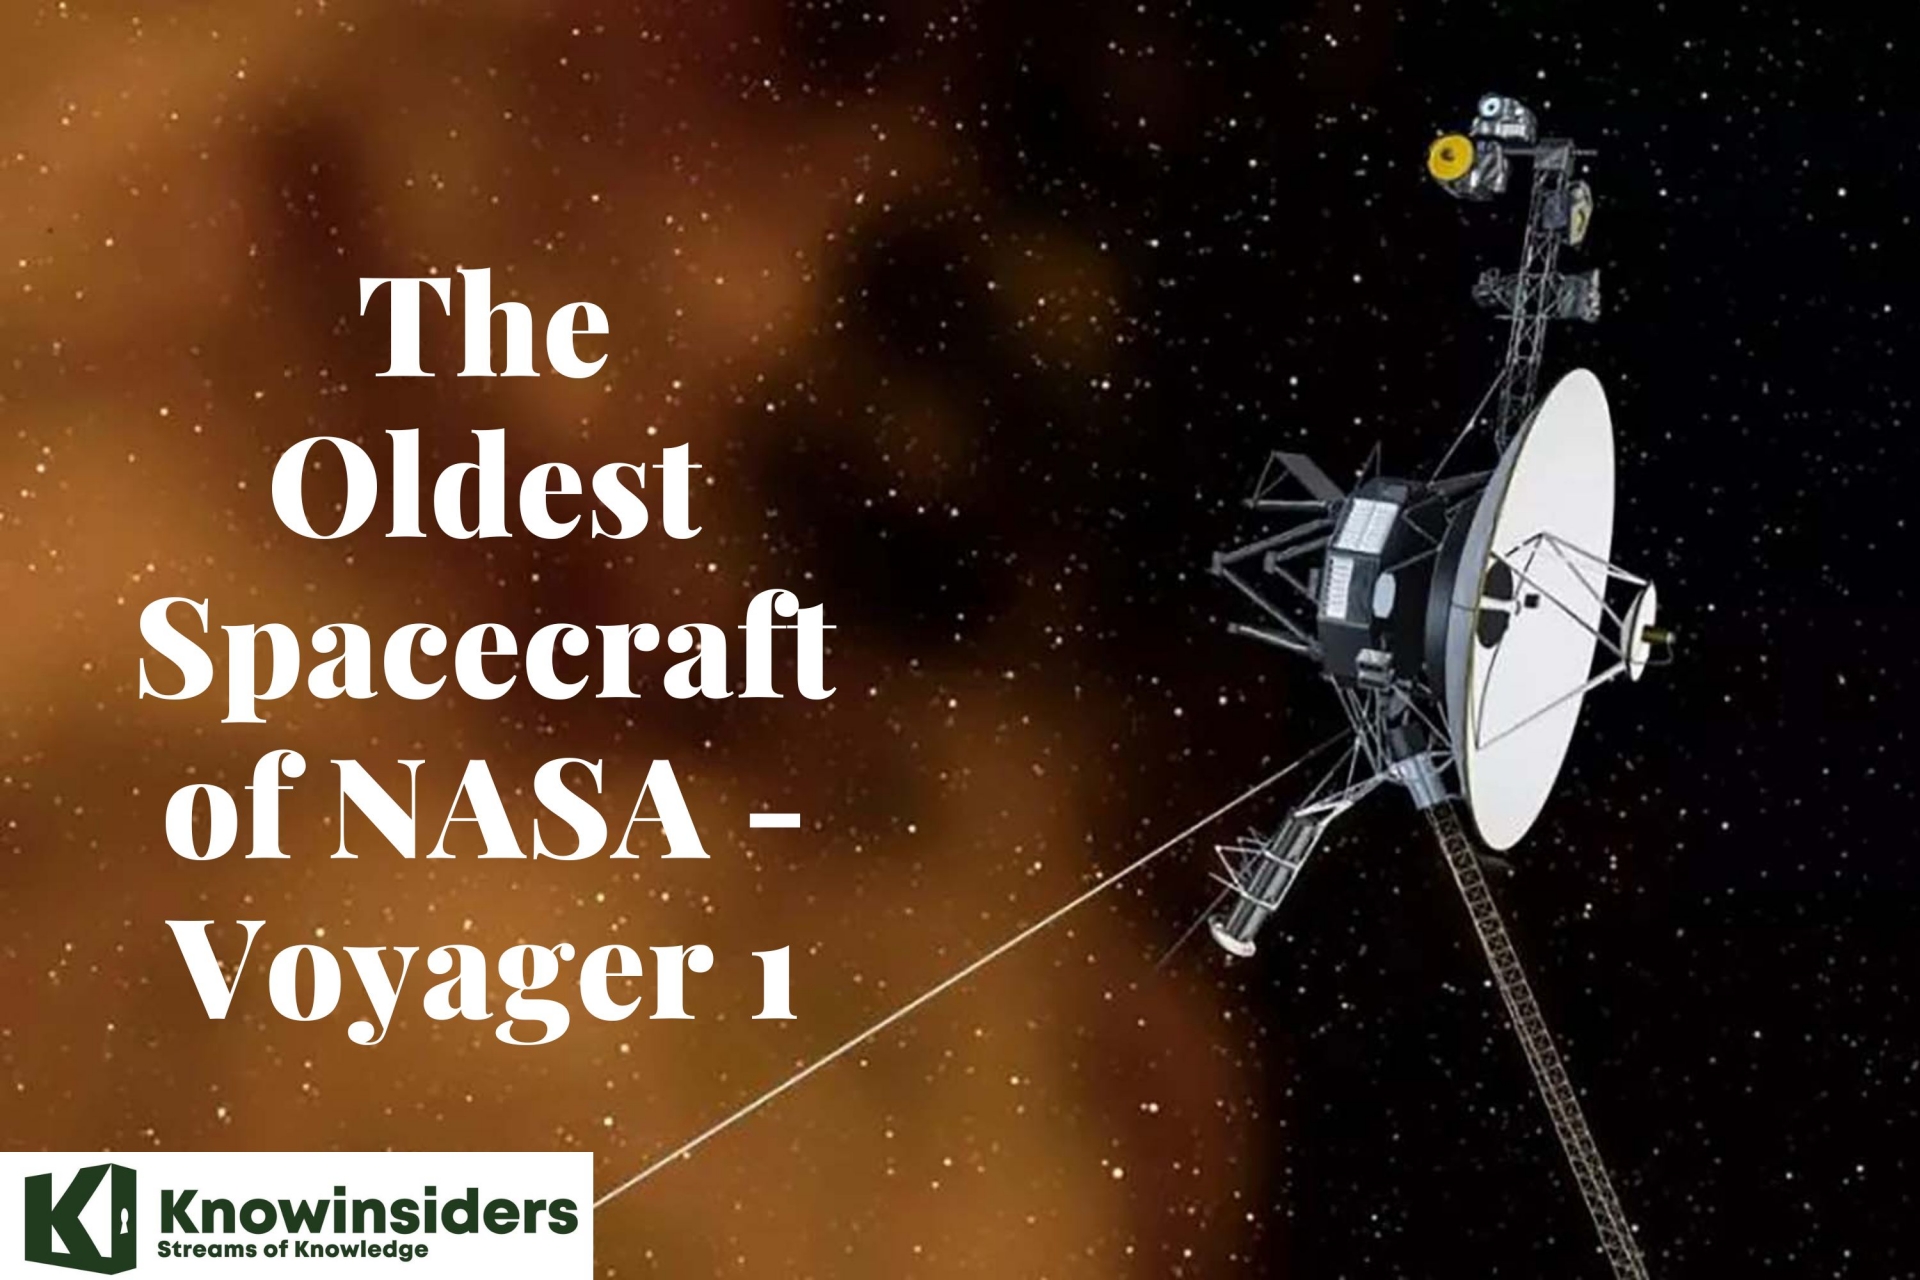 The Oldest Spacecraft of NASA - Voyager 1